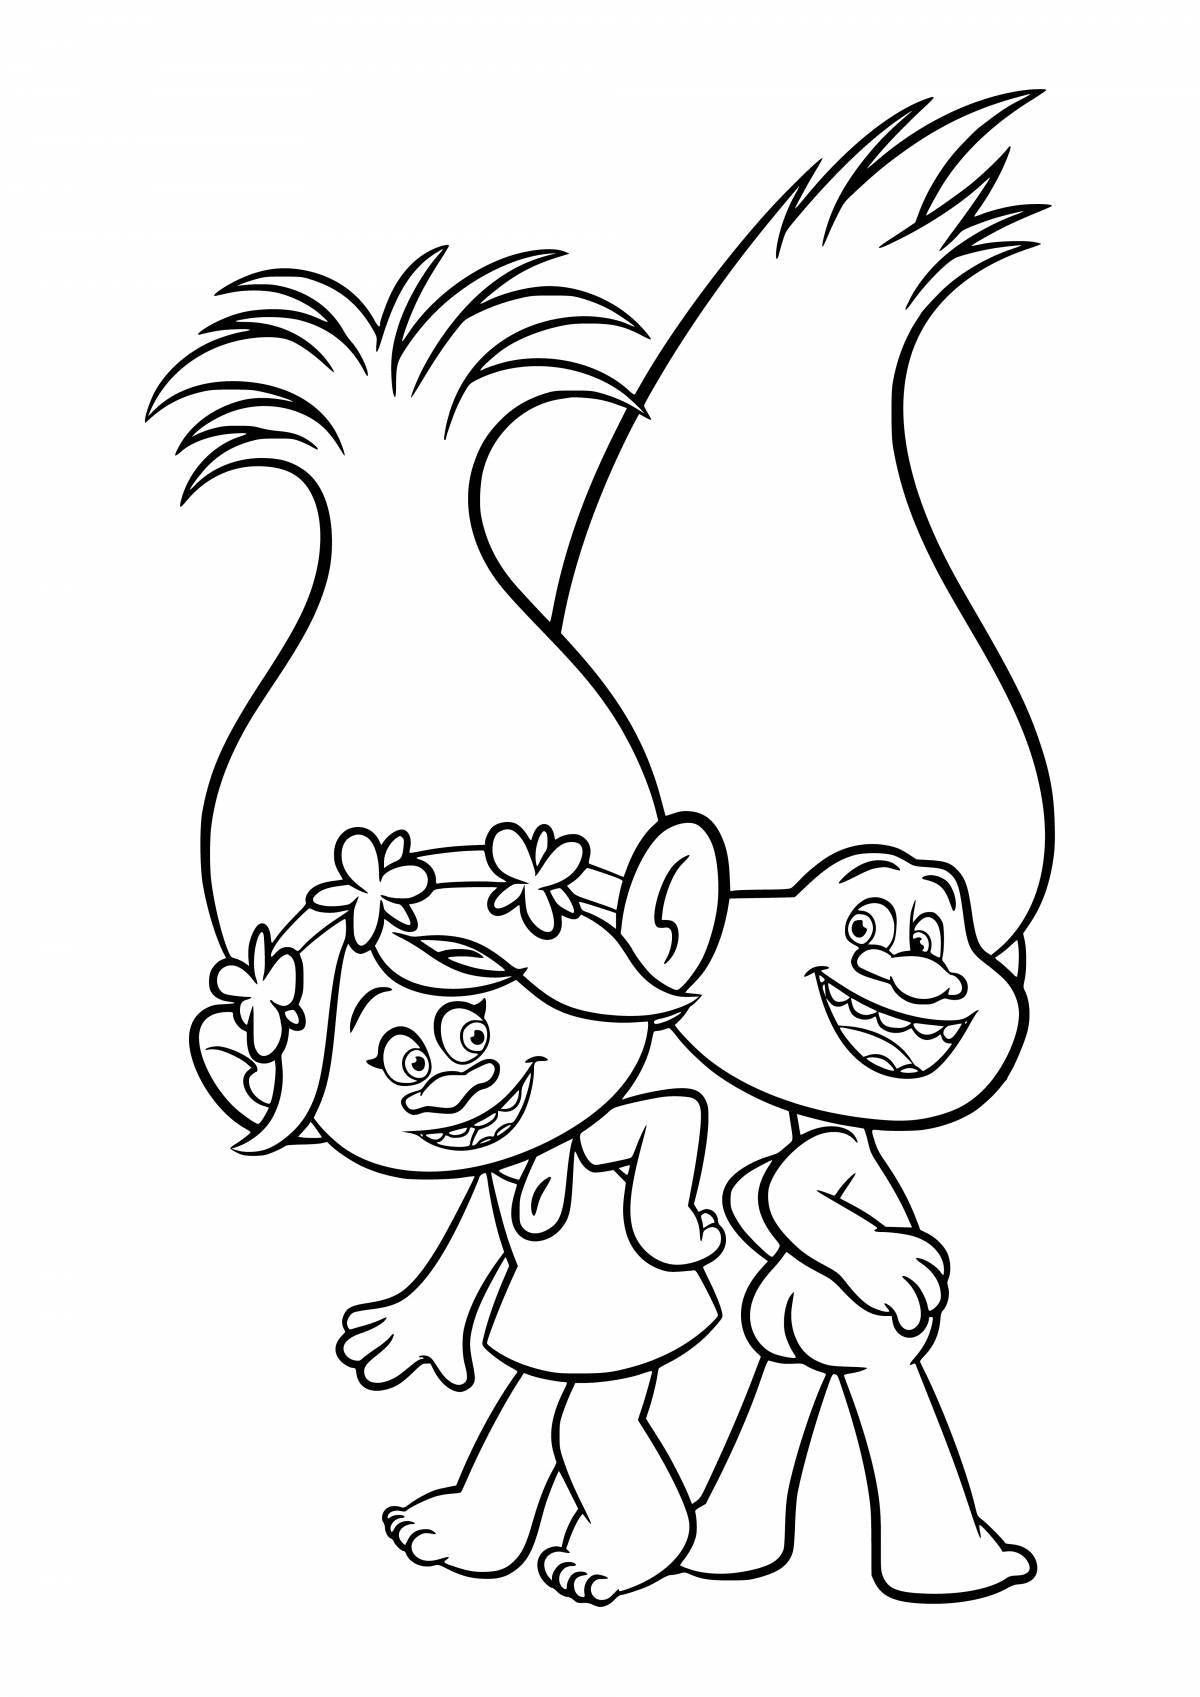 Coloring book sparkling roses trolls